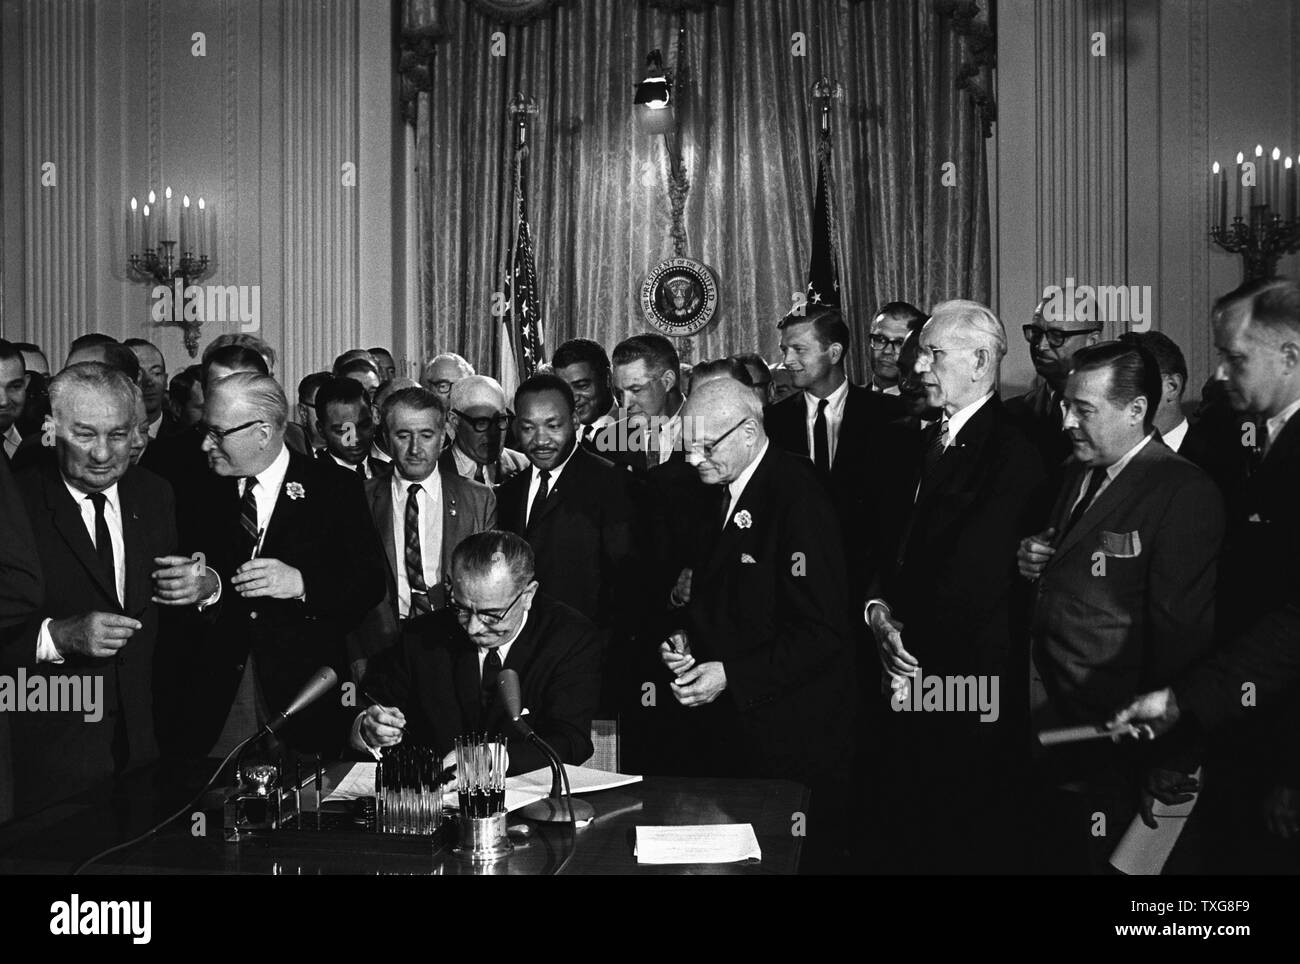 Lyndon Baines Johnson, referred to as LBJ, served as the 36th President of the United States from (1963-1969). Lyndon Johnson signing the Civil Rights Act, 2 July 1964. Martin Luther king Jr looks on the President Stock Photo